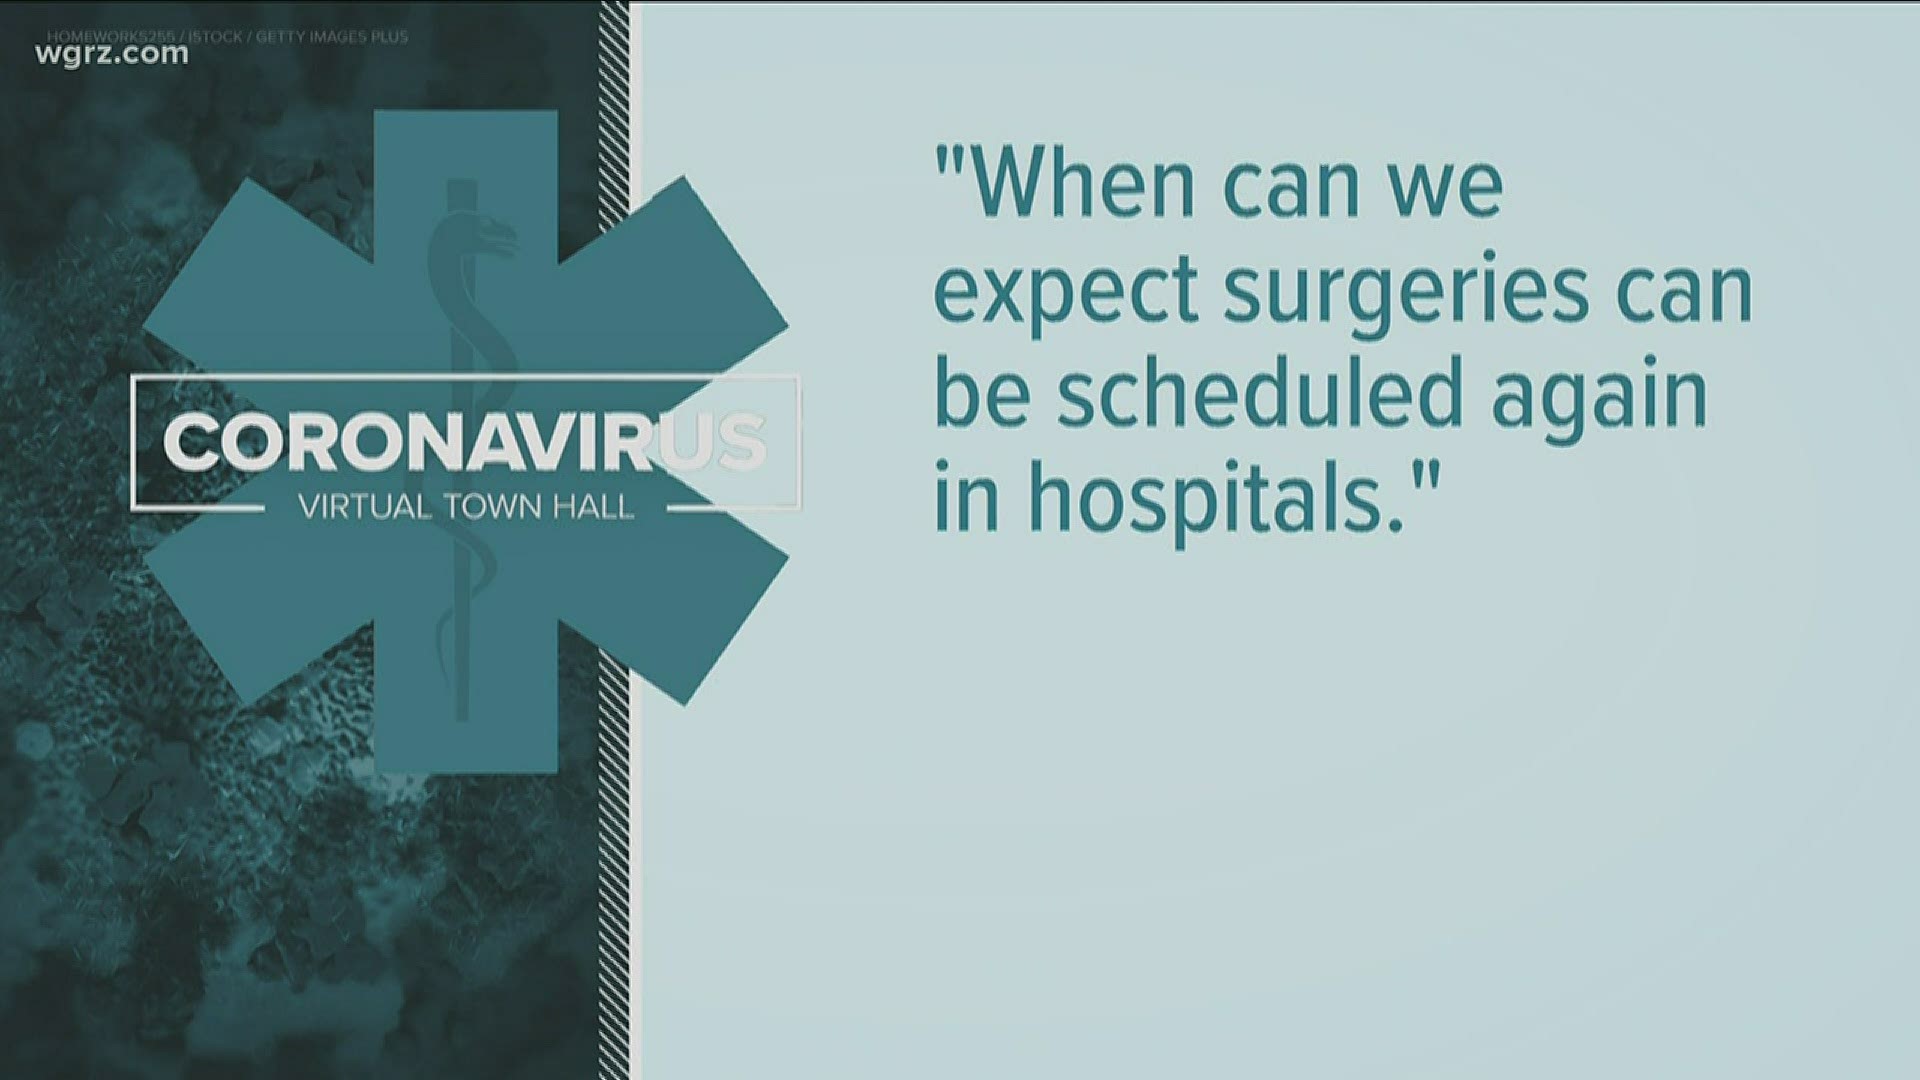 "When can we expect surgeries can be scheduled again in hospitals." Turns out we'll know more "tomorrow" according to the governor "today."